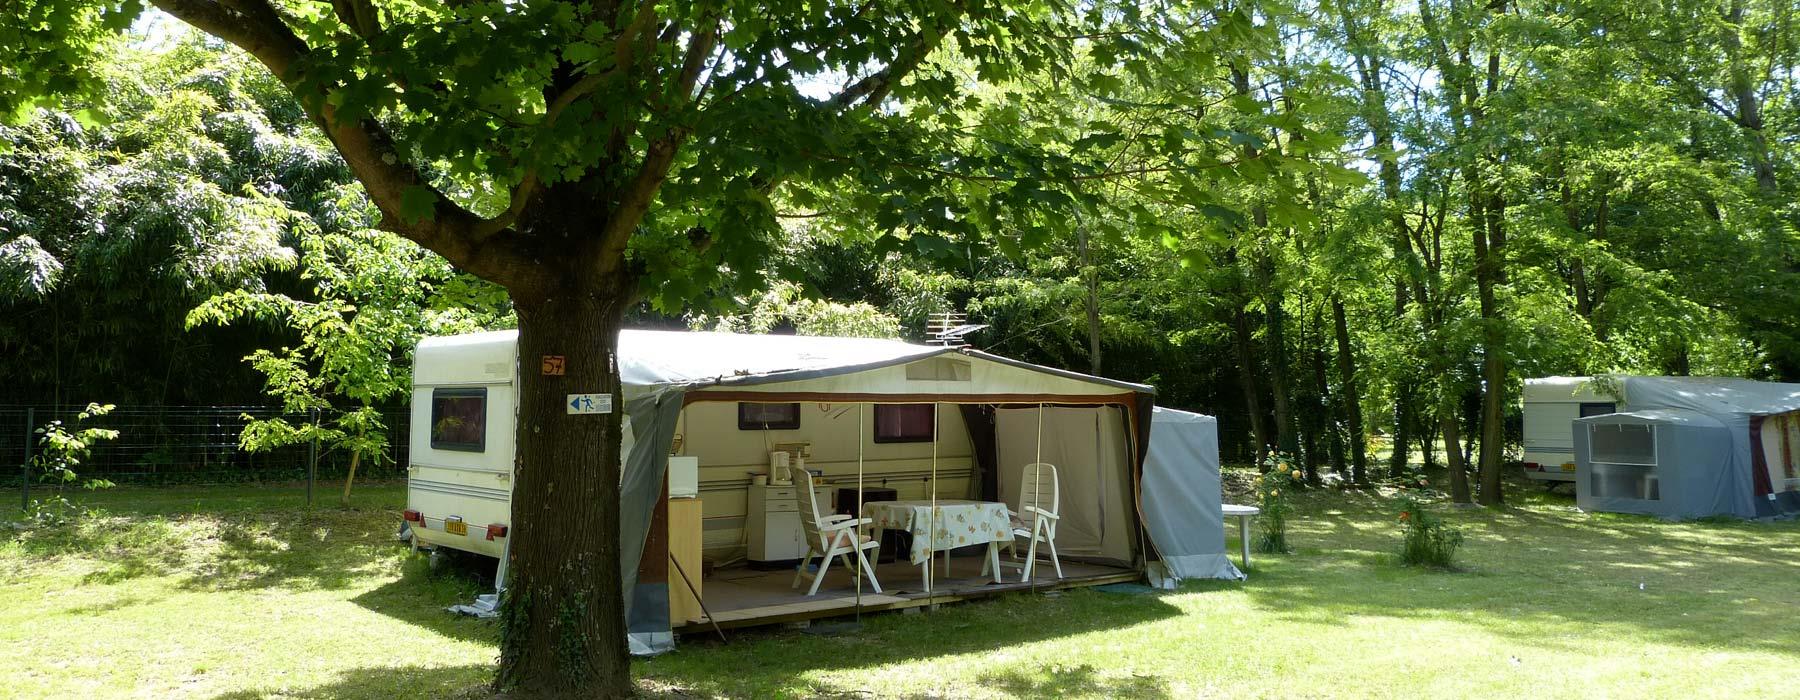 Emplacement - Forfait Emplacement Camping - Camping Les Acacias